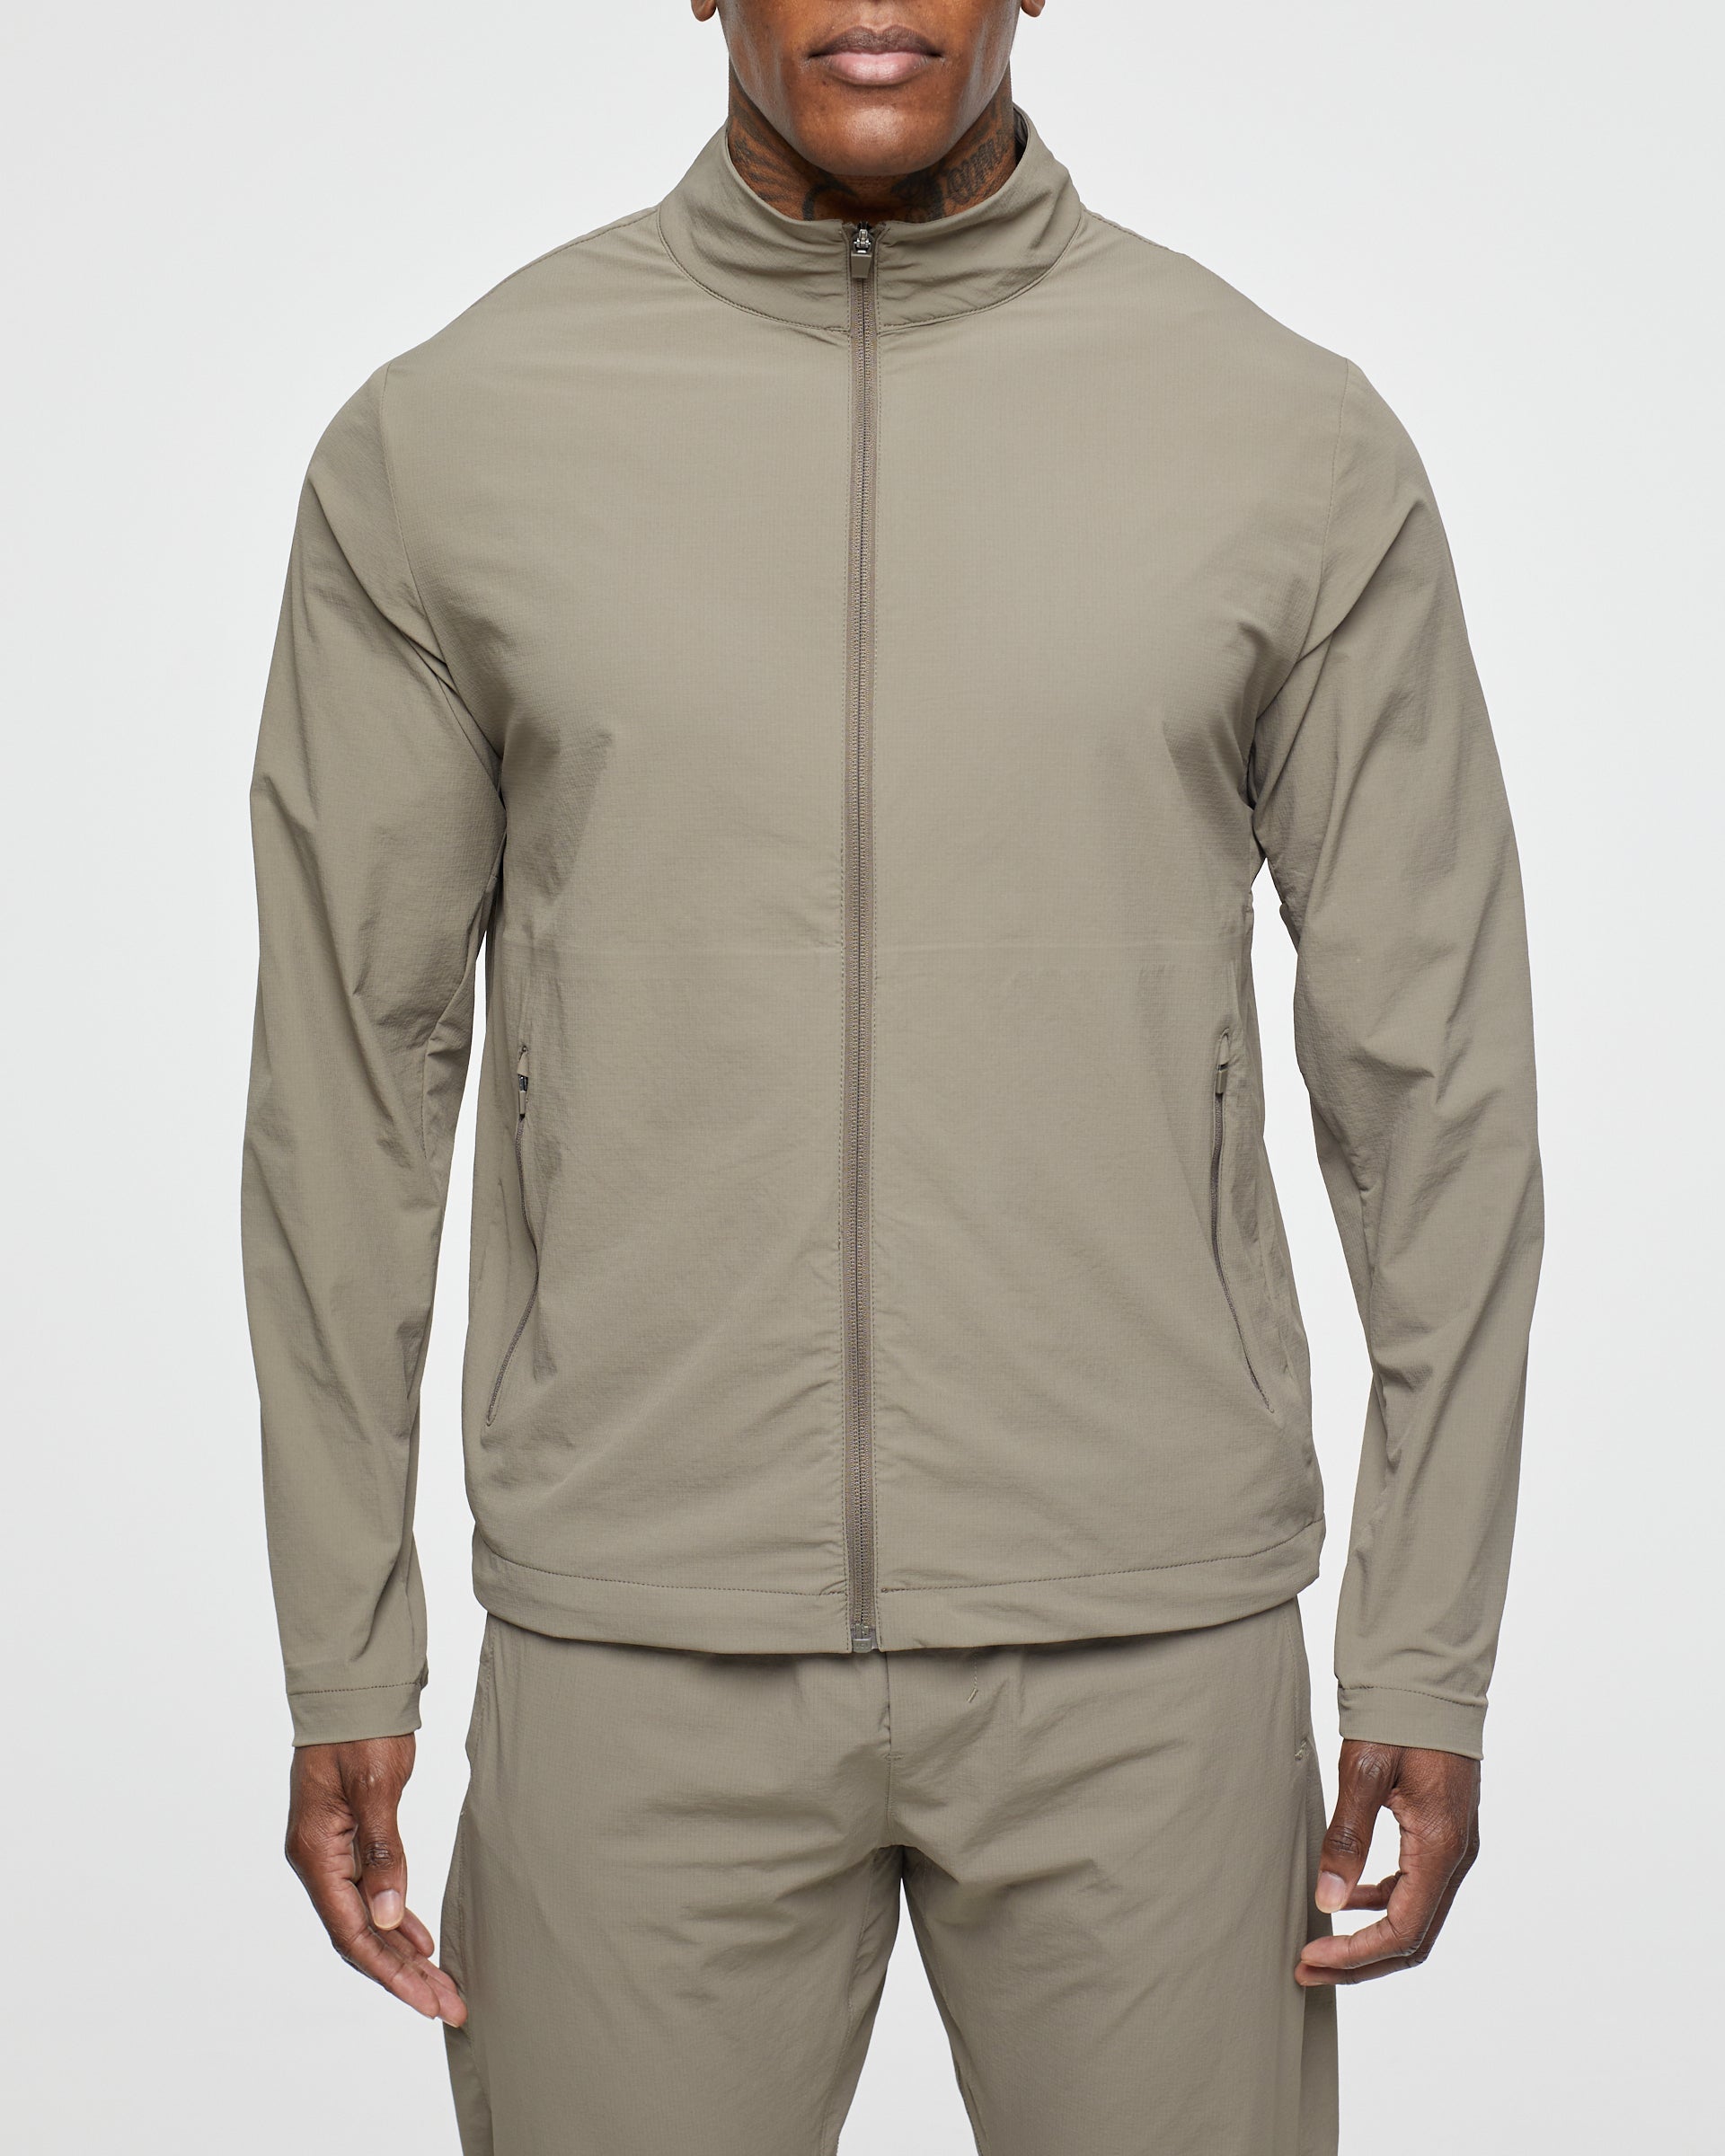 CORE JACKET - TAUPE